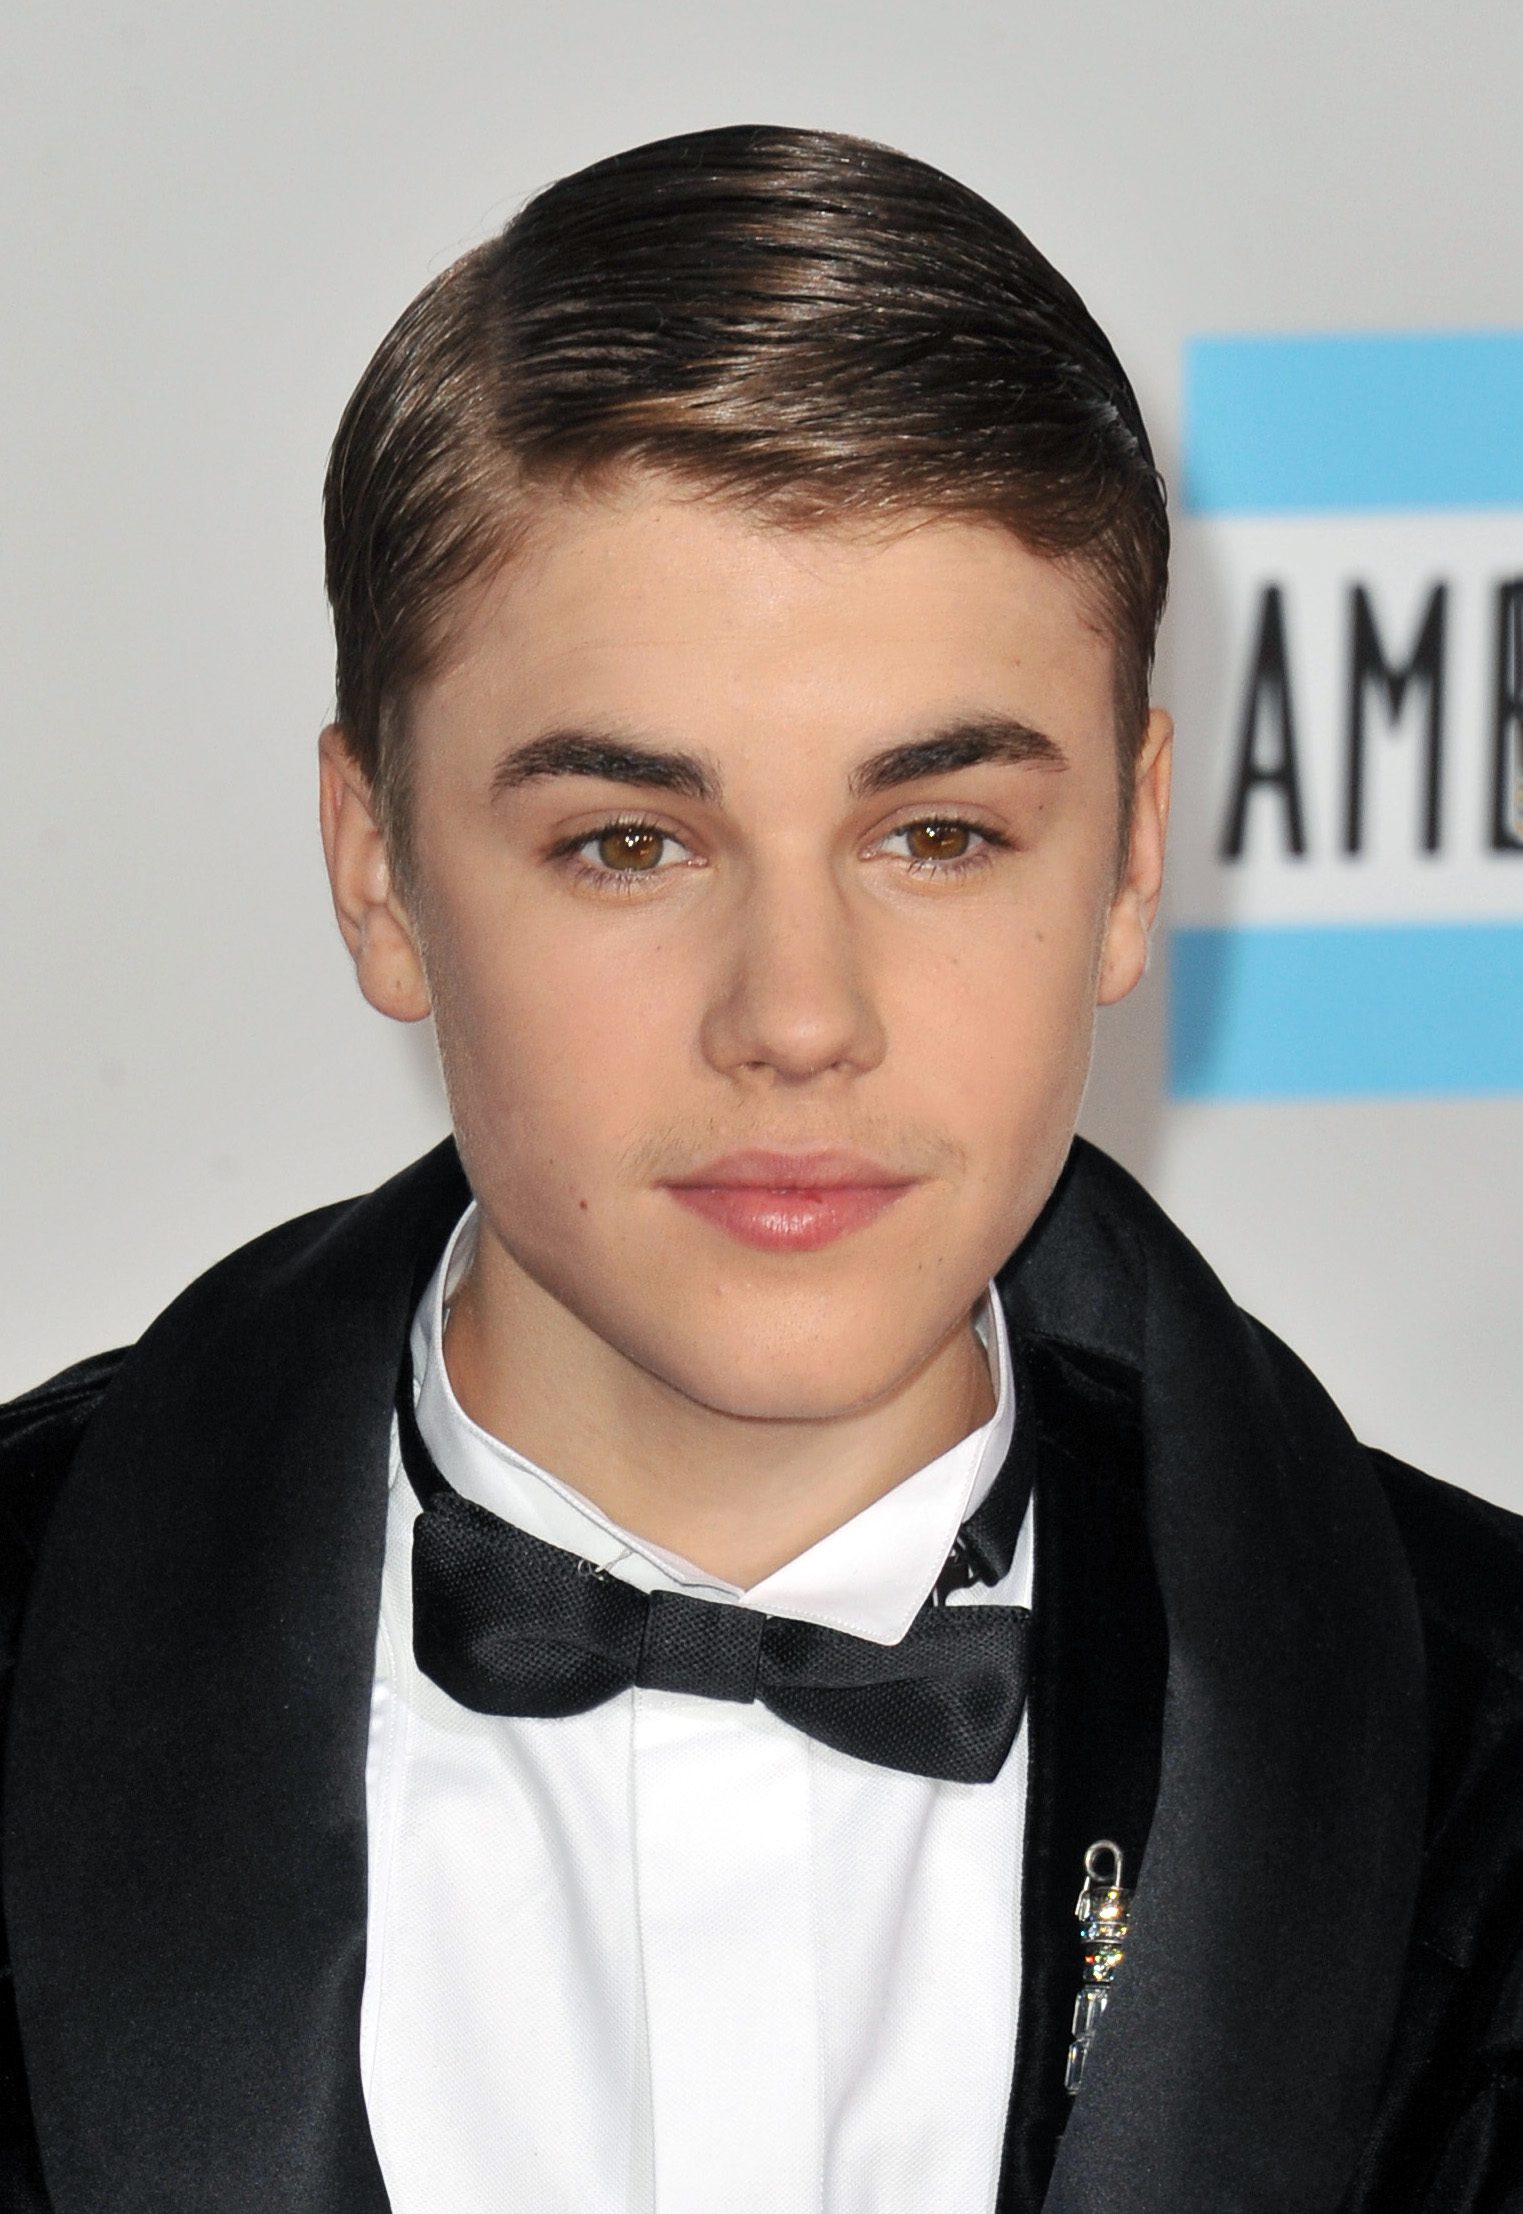 50 Best Justin Bieber Haircut Ideas for 2022 (With Images)